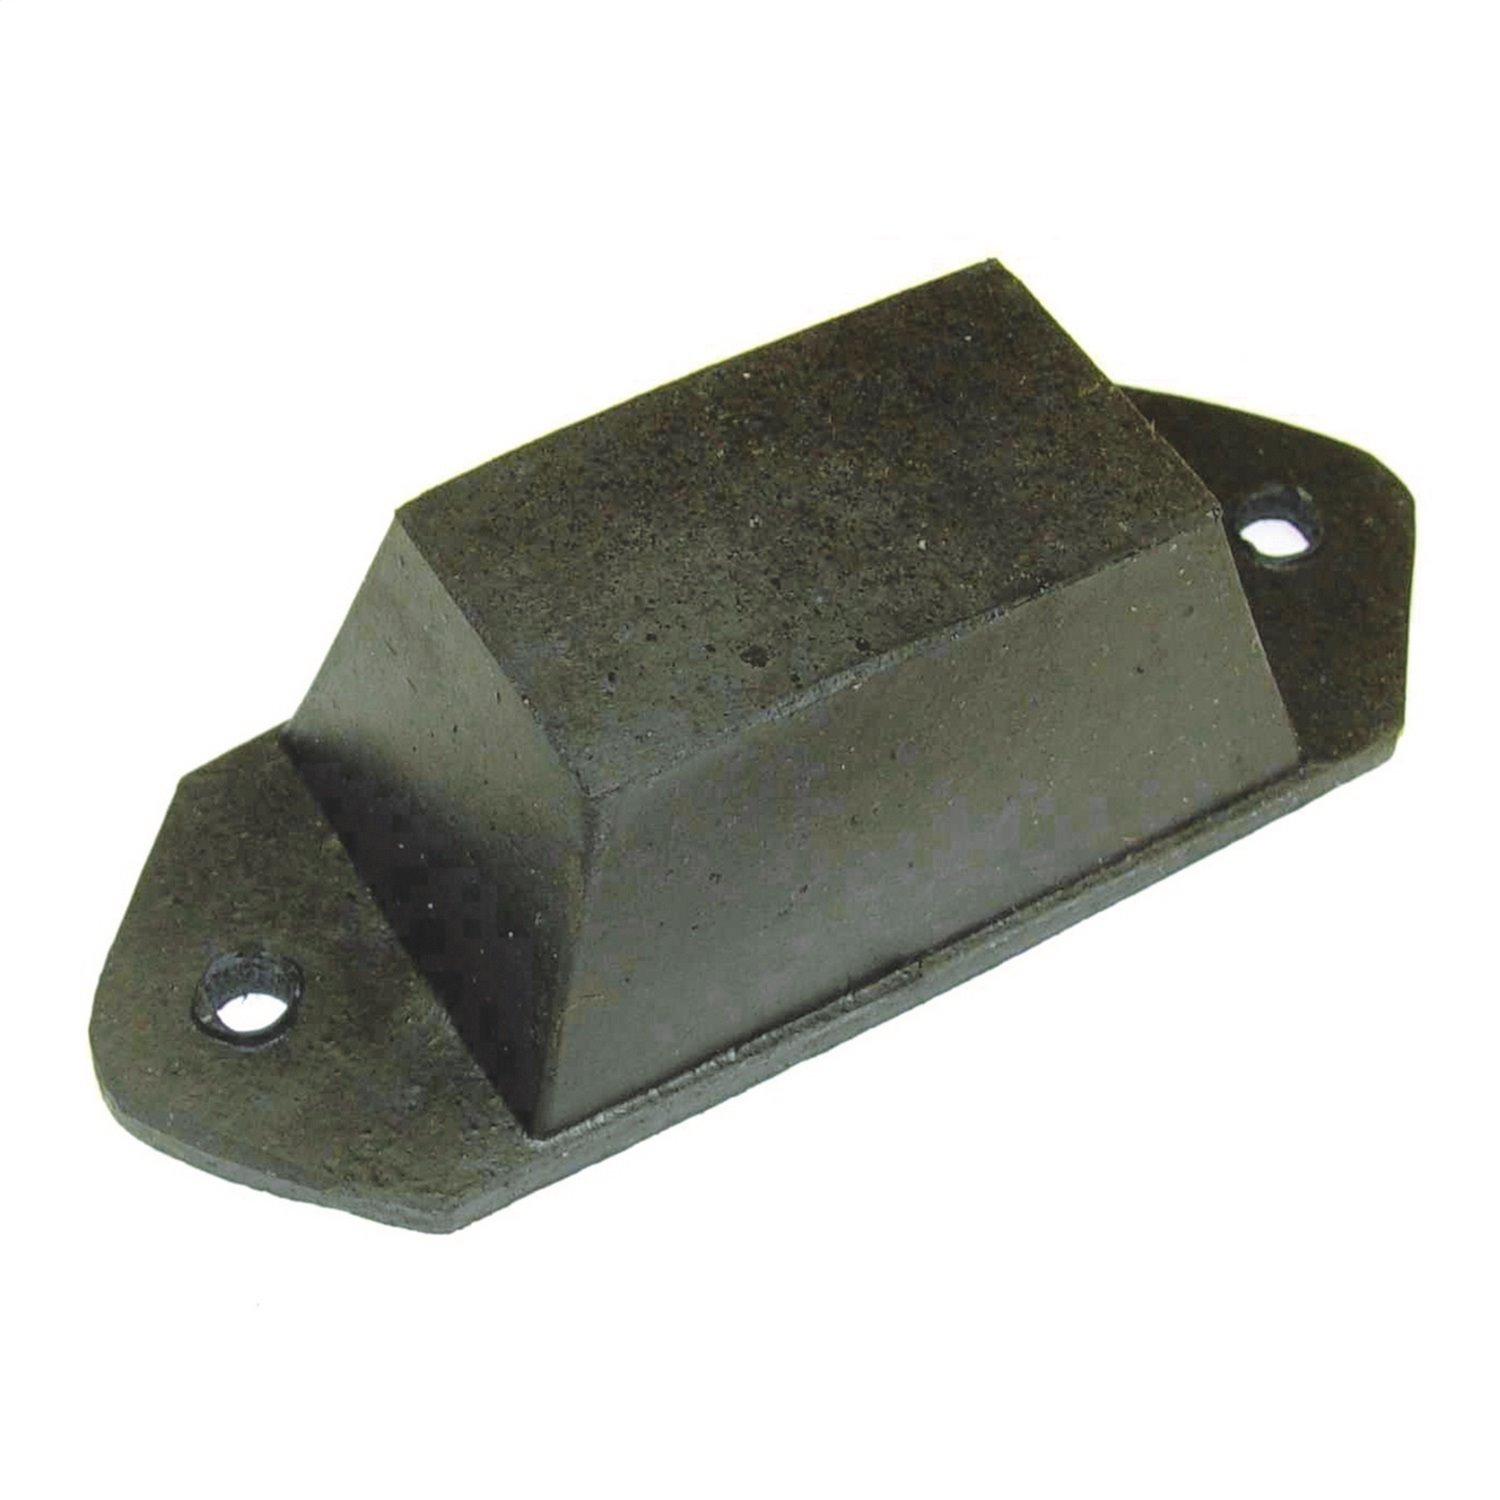 Factory-style replacement leaf spring axle snubber from Omix-ADA, Fits 41-71 Willys and Jeep models.